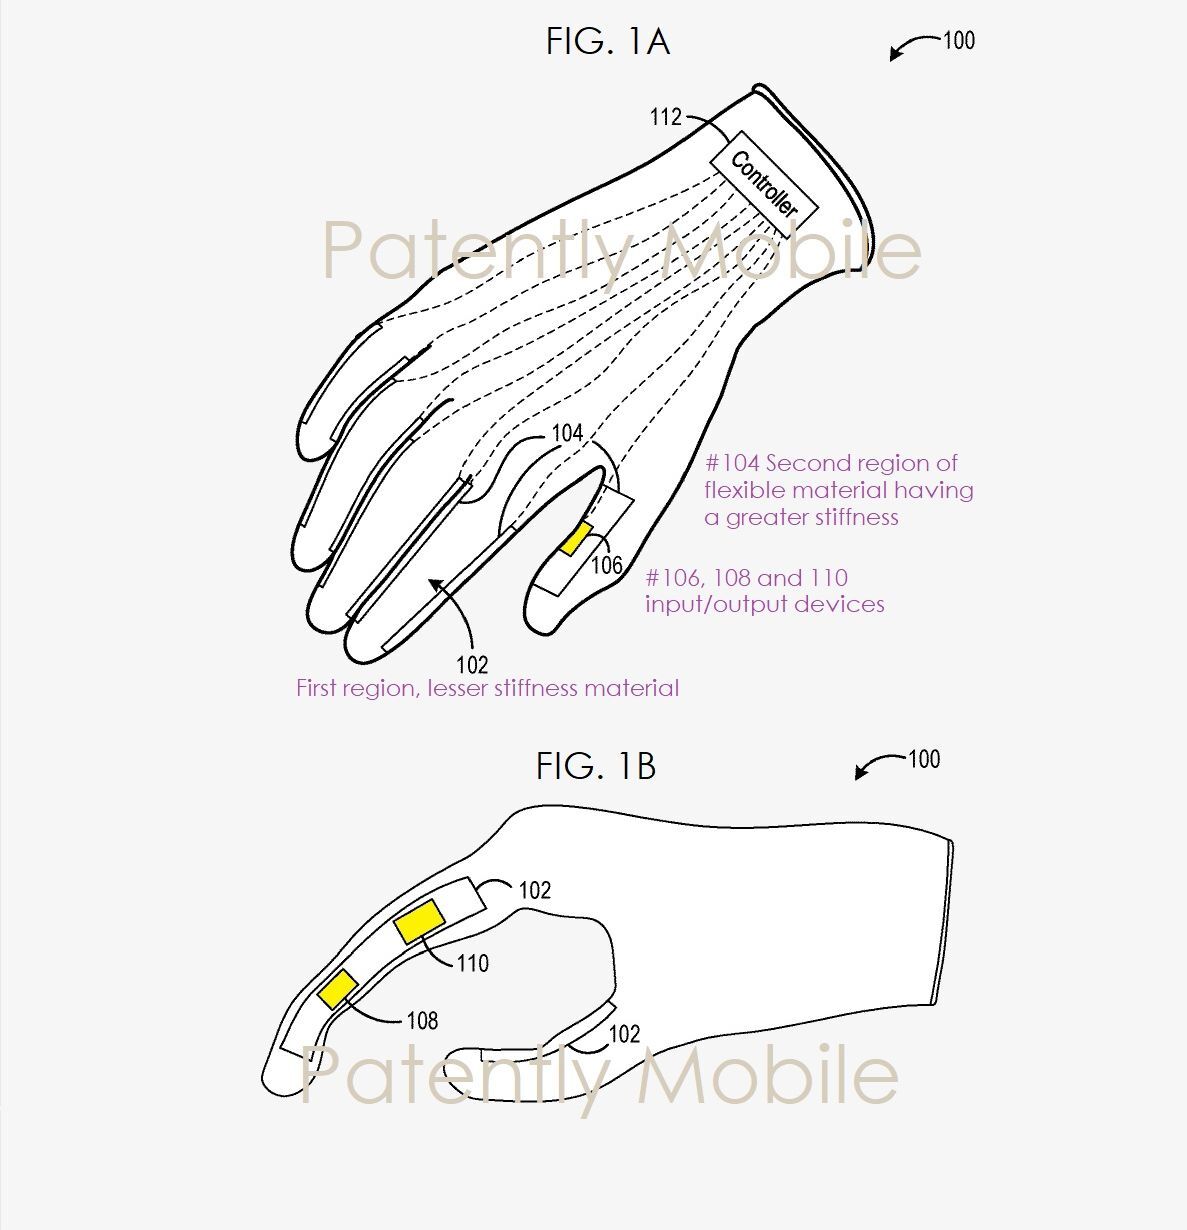 Image by Patently Mobile - Microsoft is working on a smart glove, patent shows